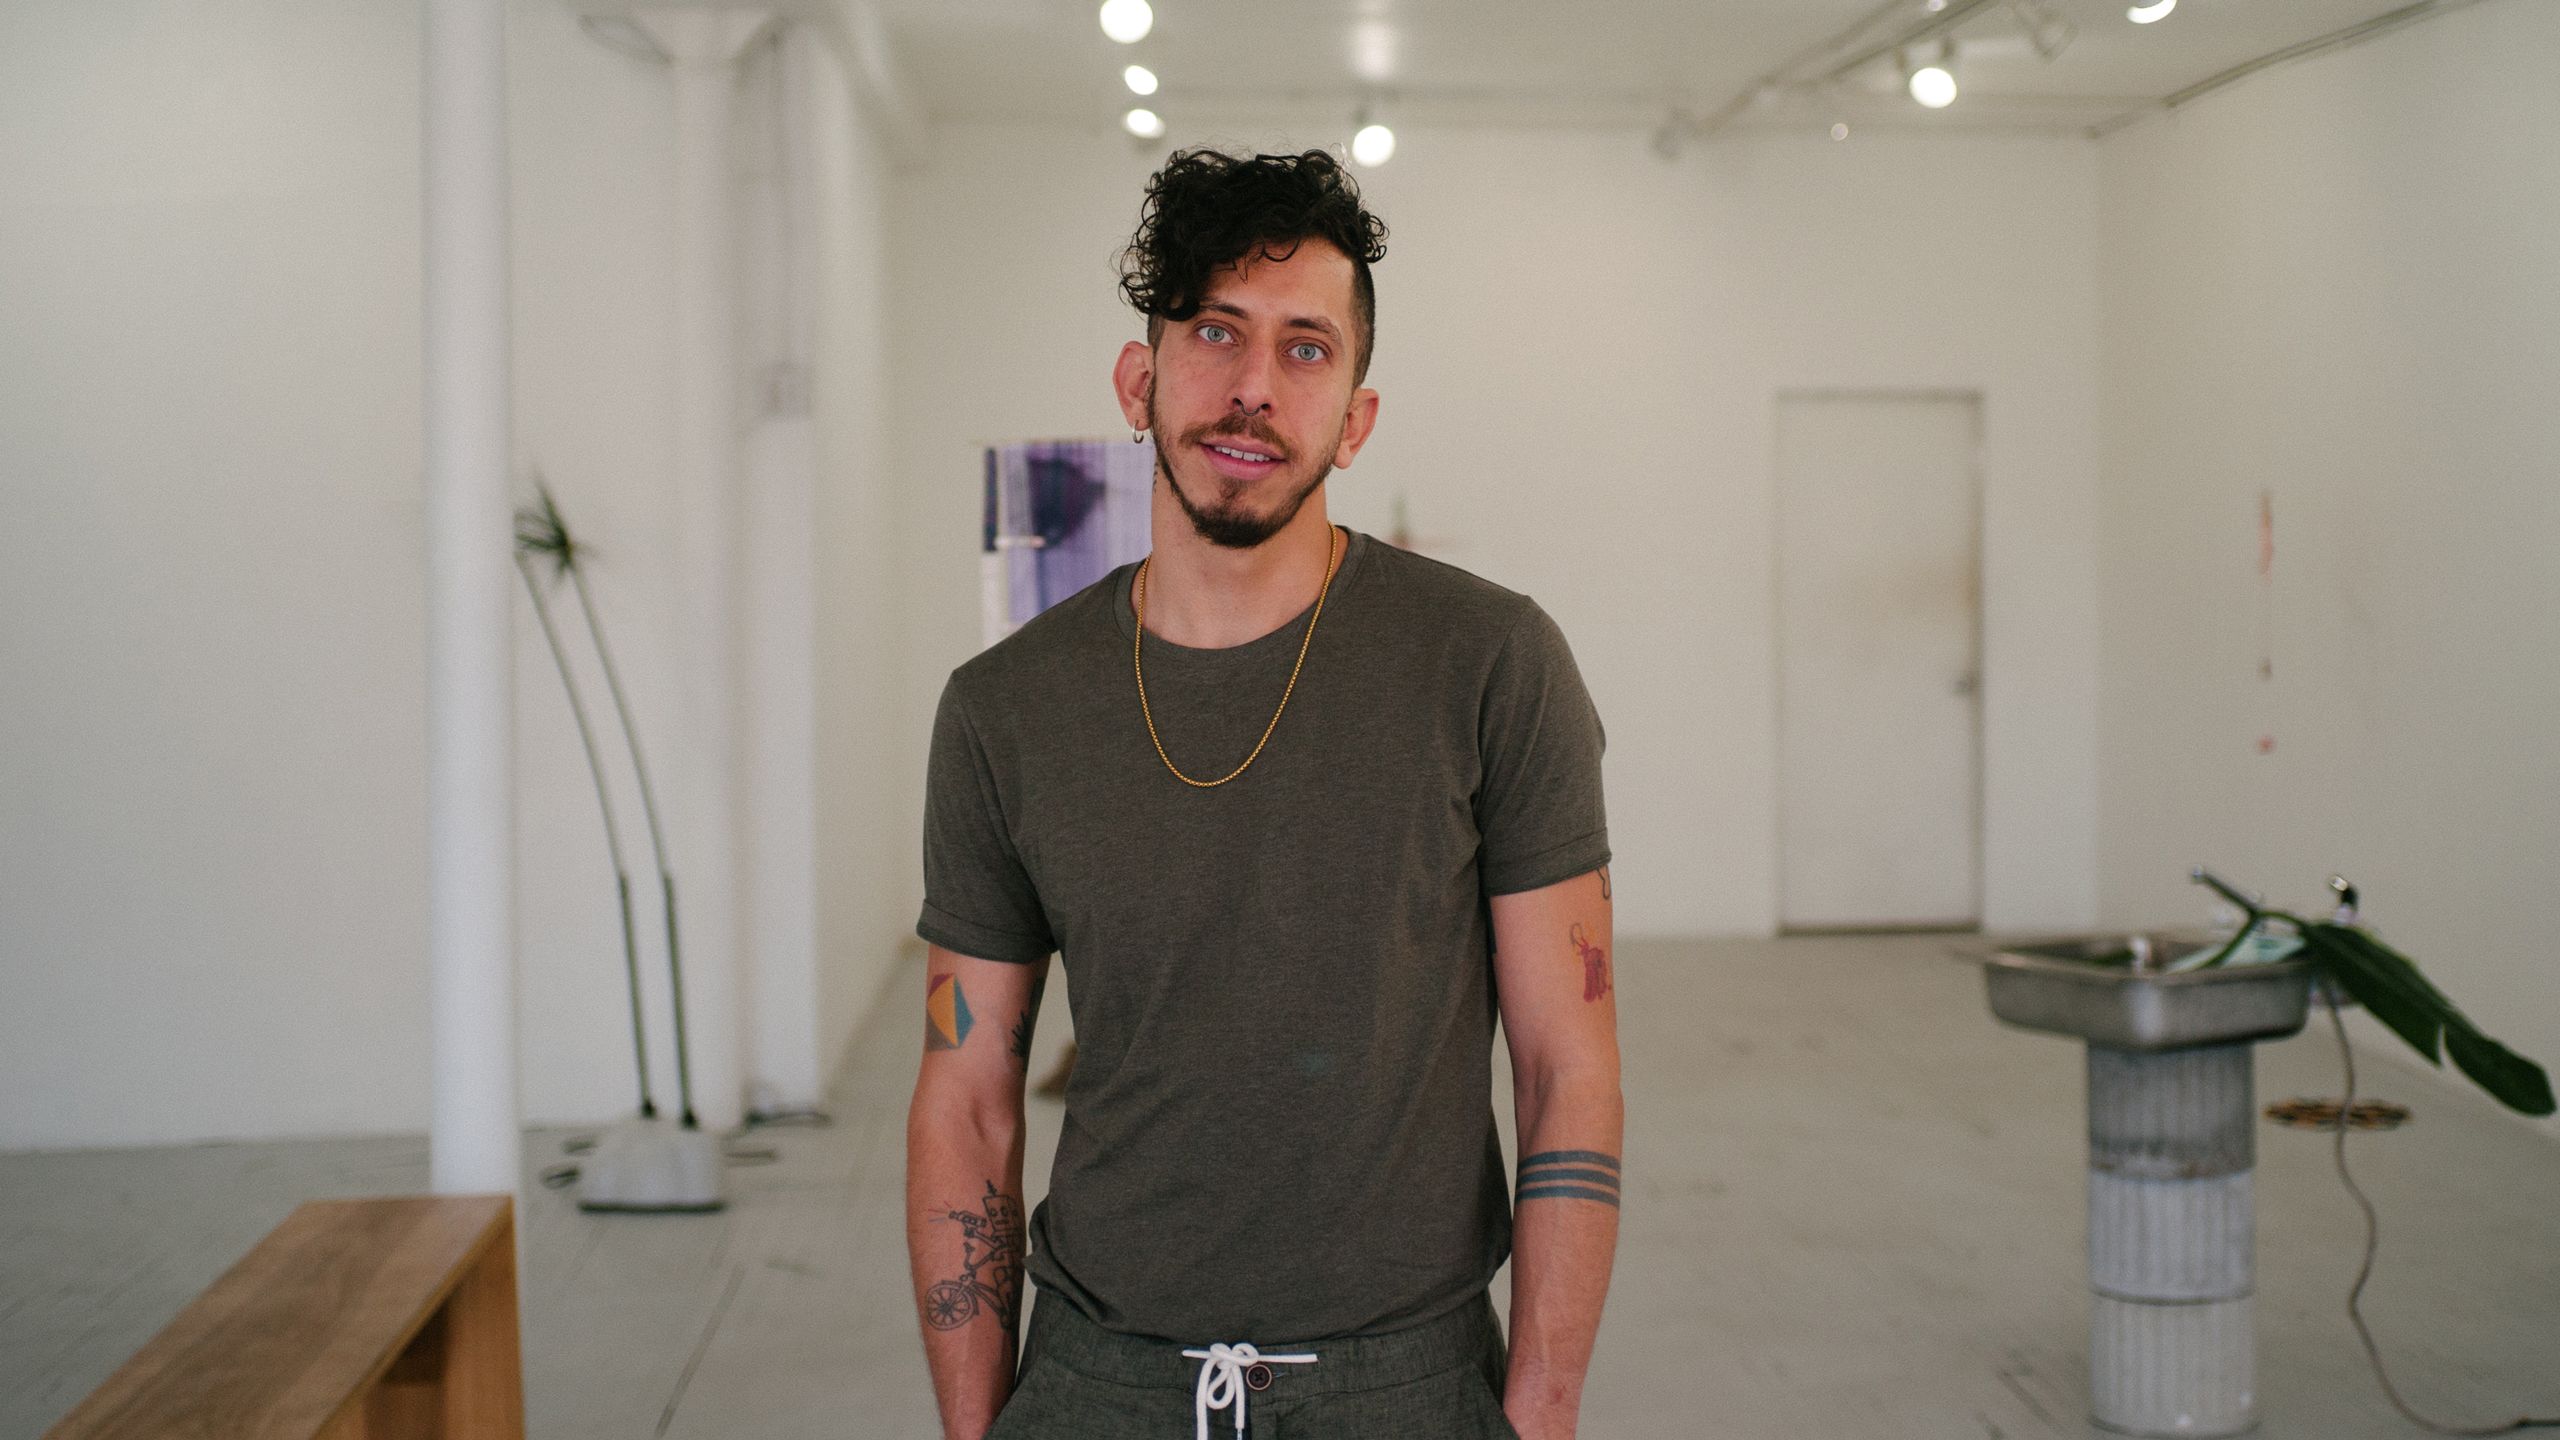 A man in a t-shirt with tattoos stands in front of a white-walled gallery space